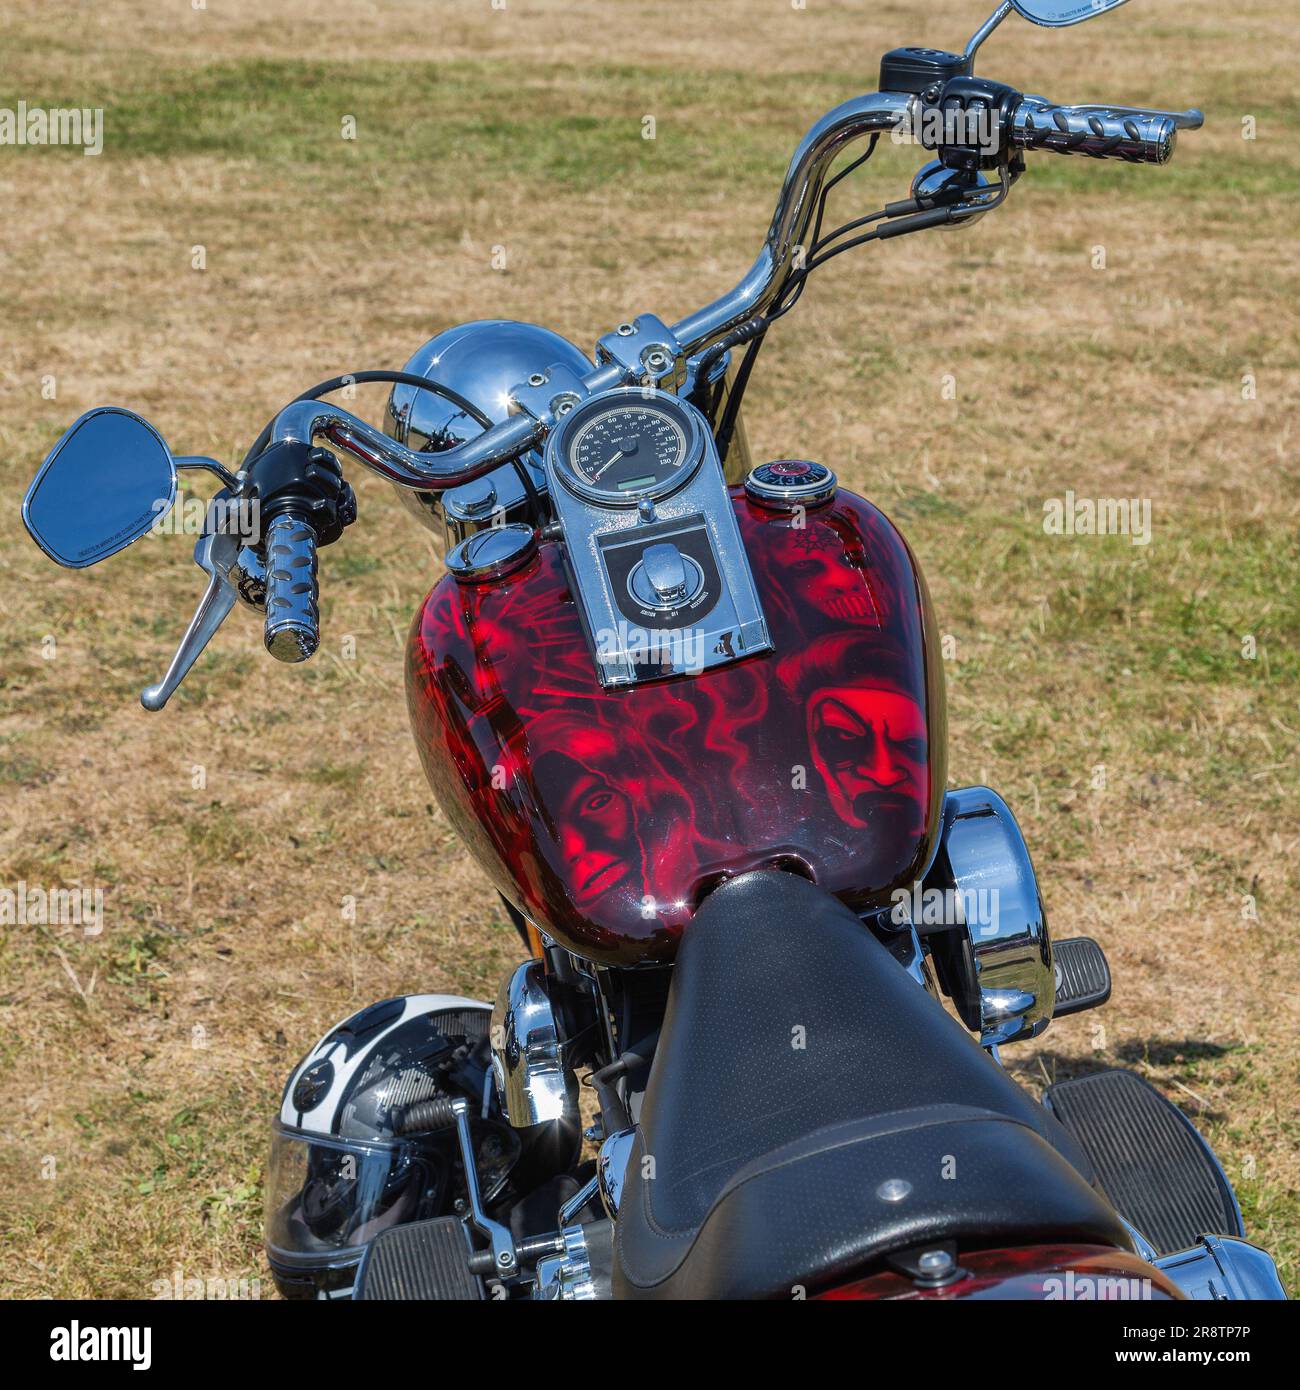 Detail of a powerful motorcycle with a custom painted petrol tank featuring the heavy metal band Slipknot. Stock Photo